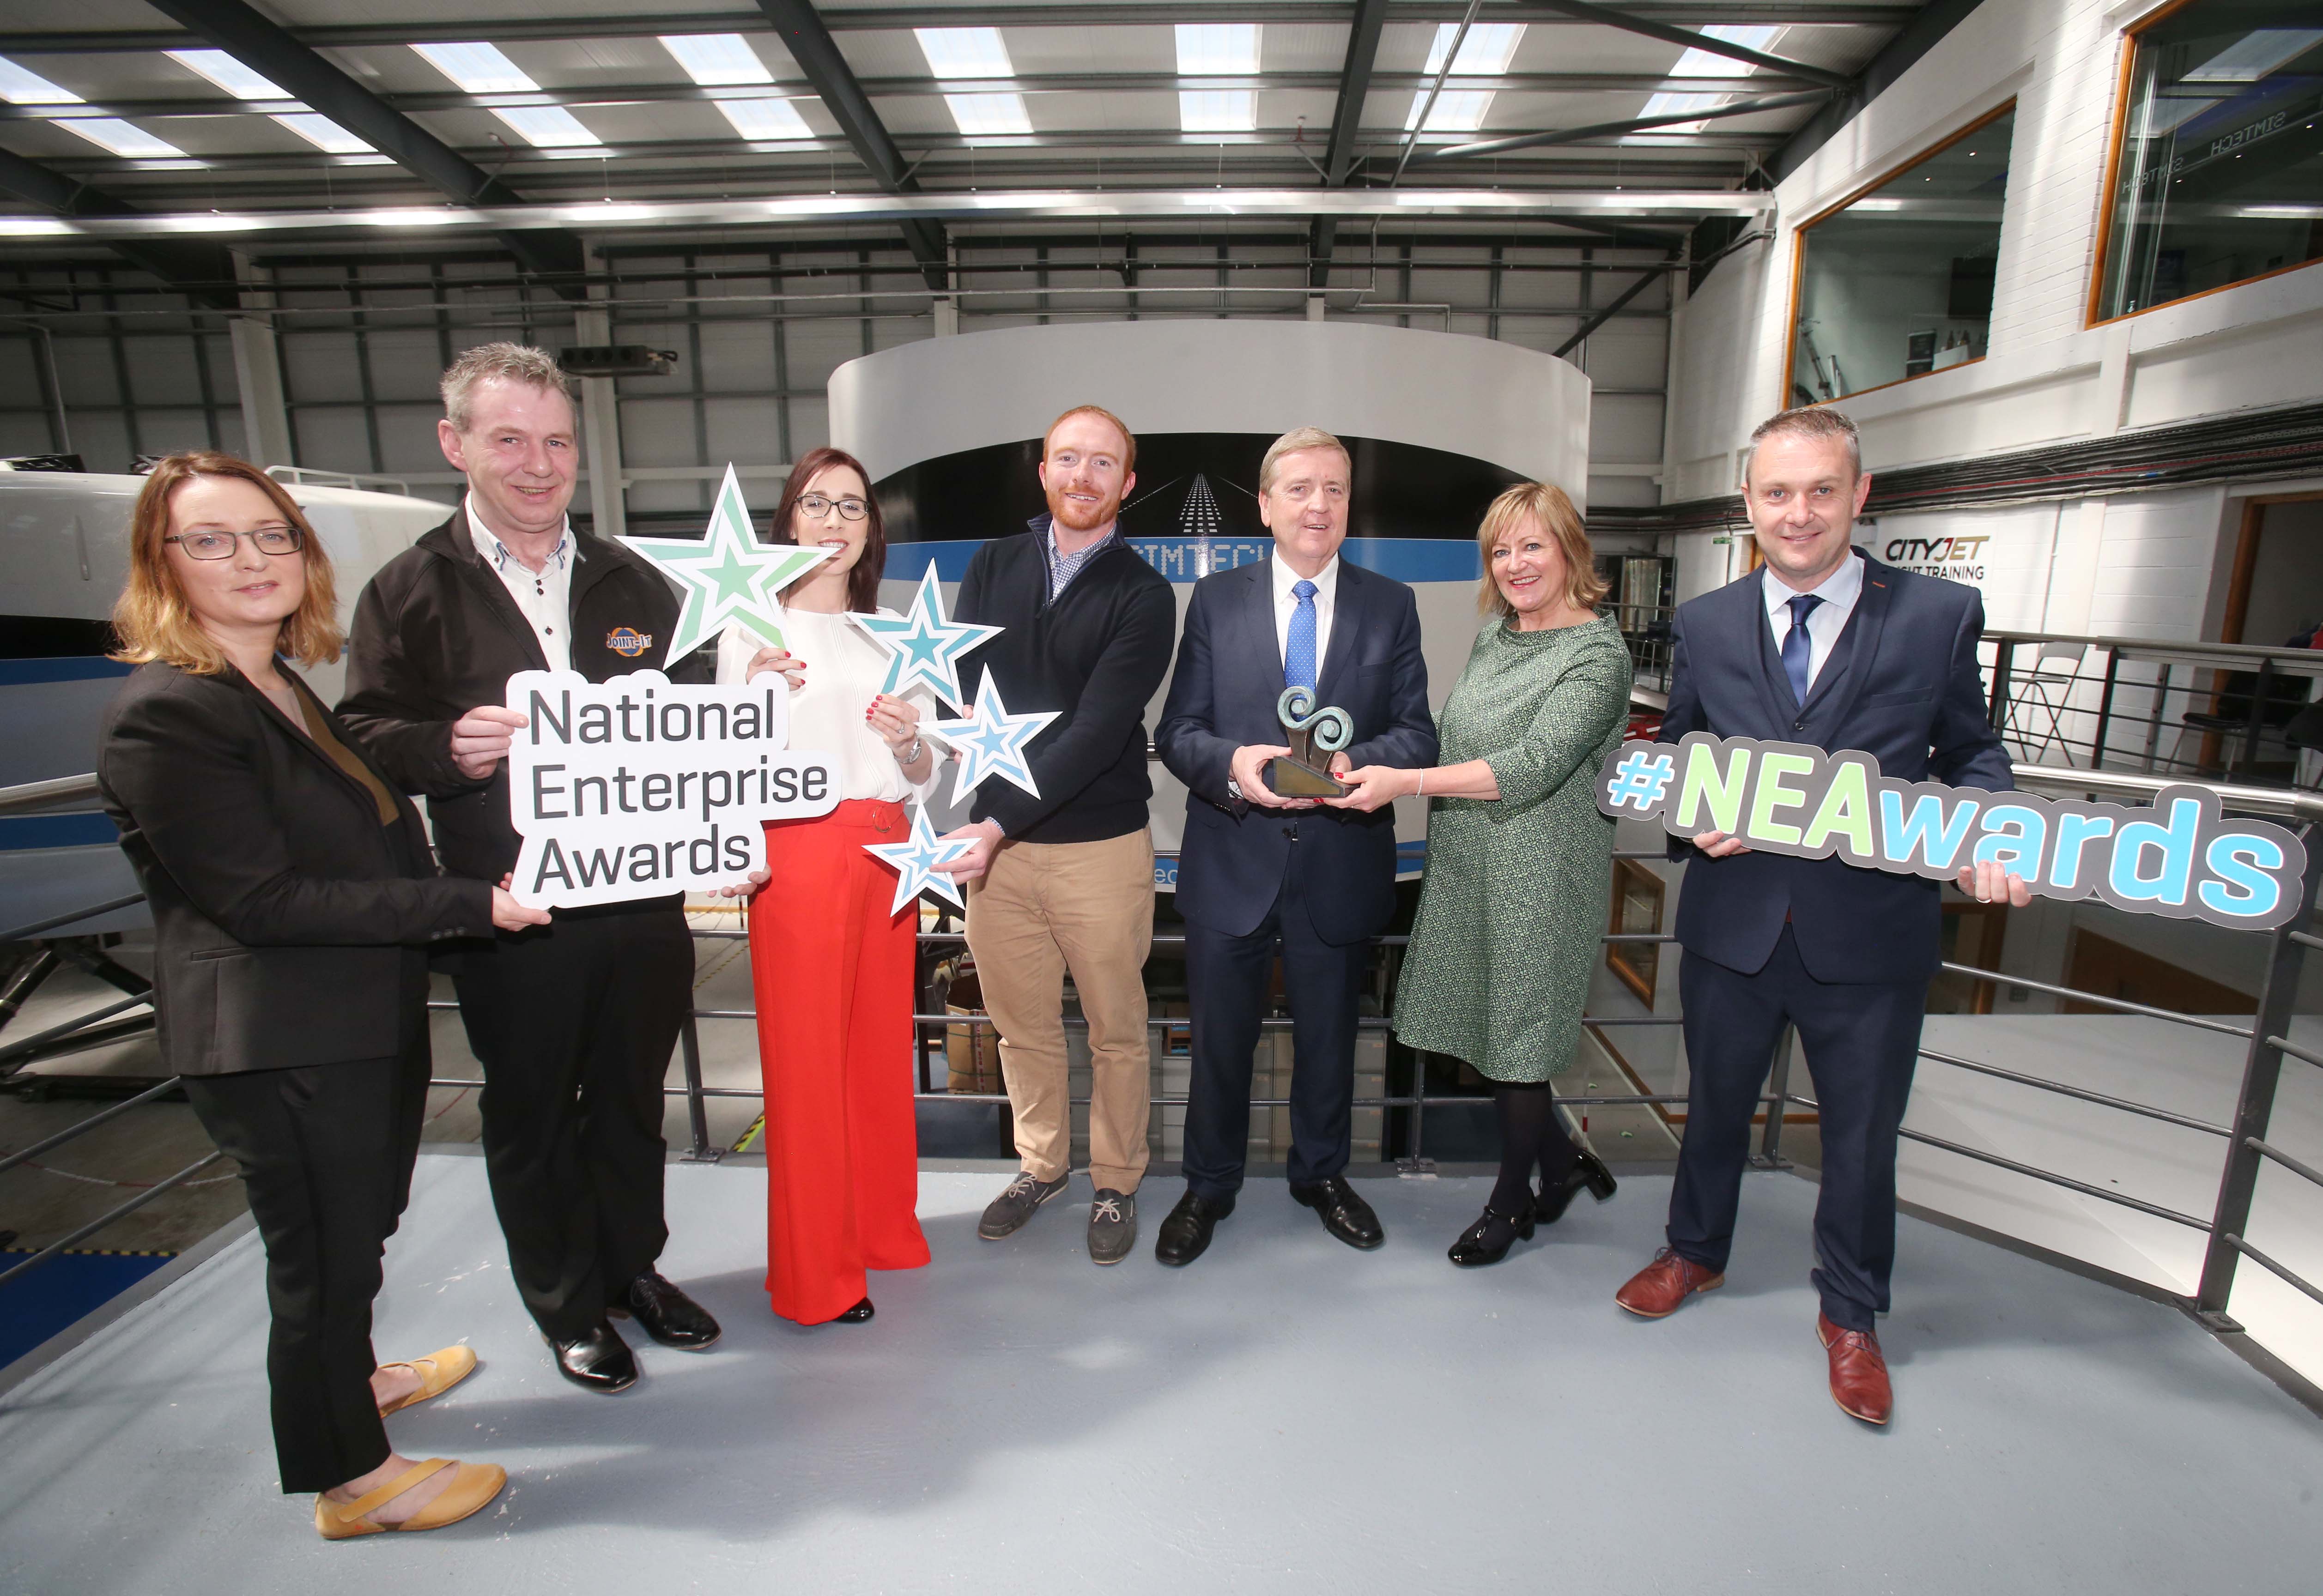 20 years of Winners for National Enterprise Awards 2018